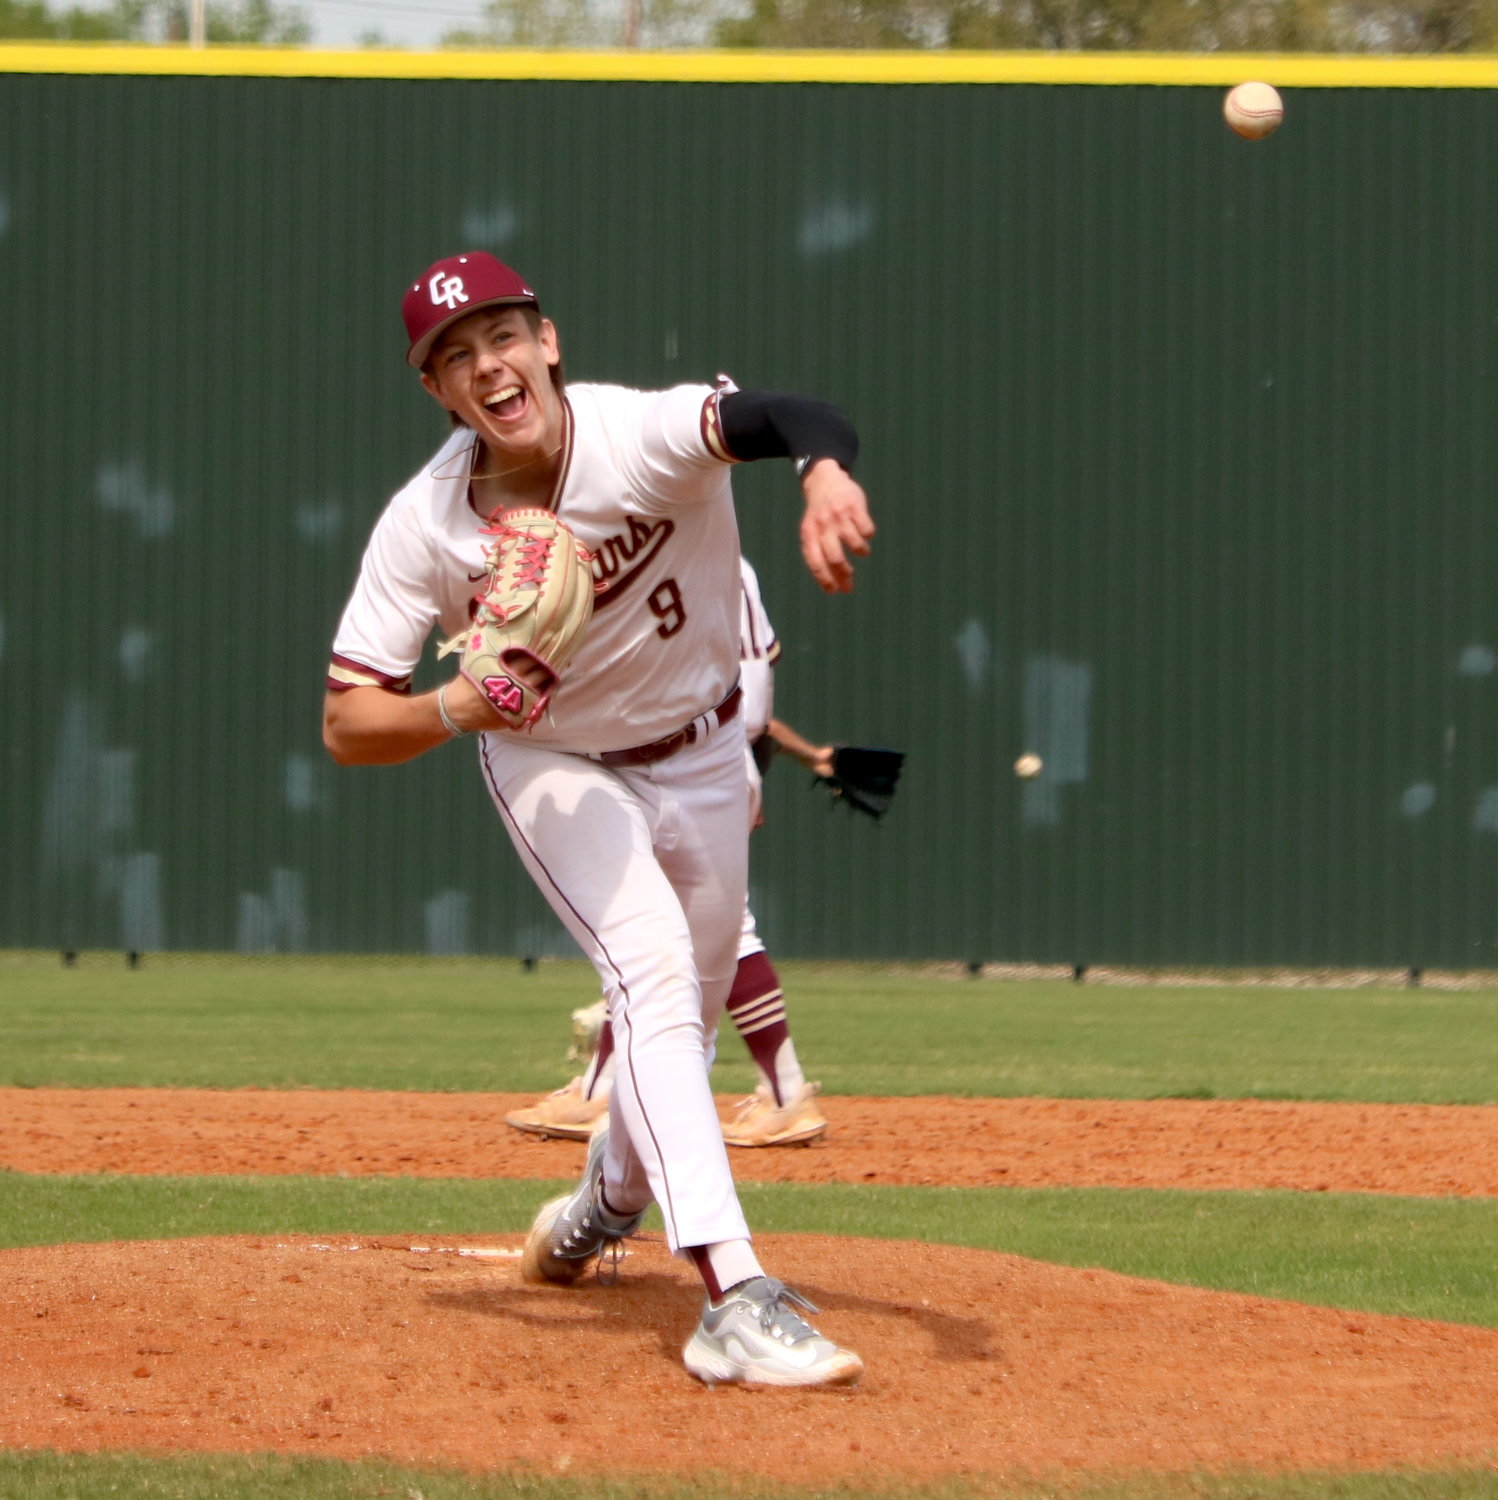 Cooper Corkrean pitches during Tuesday's game between Tompkins and Cinco Ranch at the Cinco Ranch baseball field.